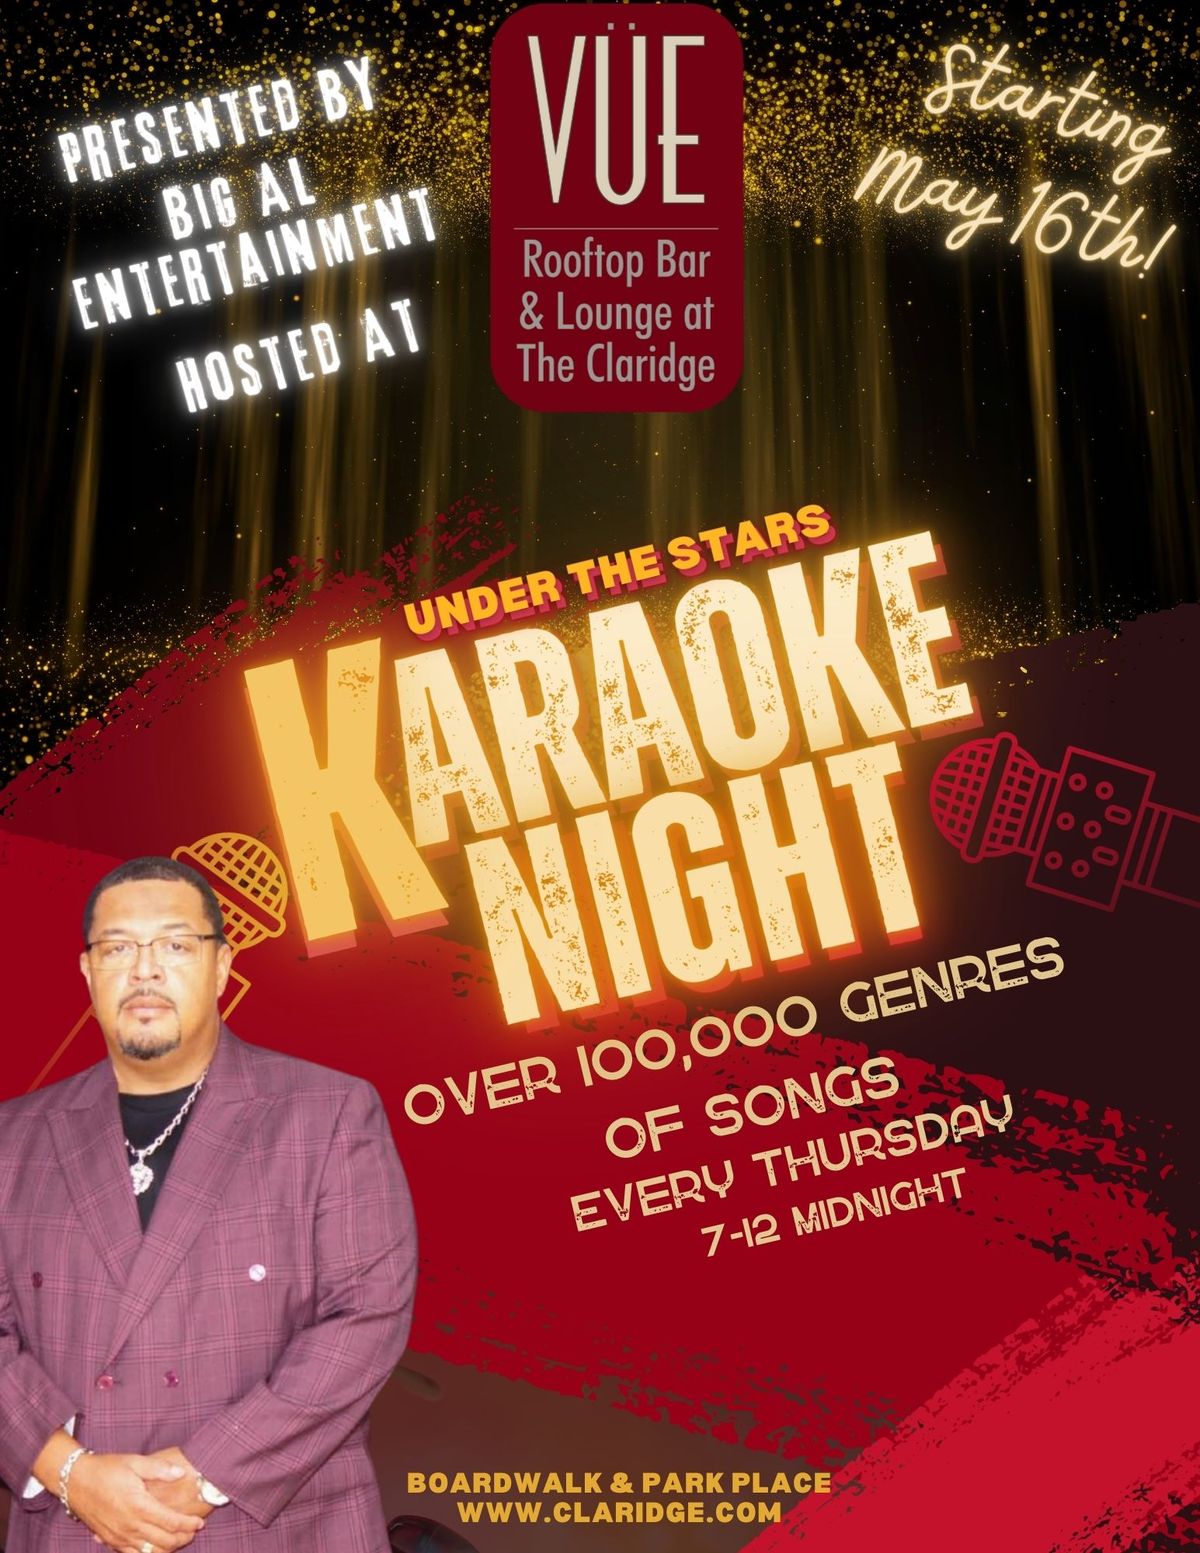 Under The Stars Karaoke Night at the V\u00dcE Rooftop Bar & Lounge at the Claridge